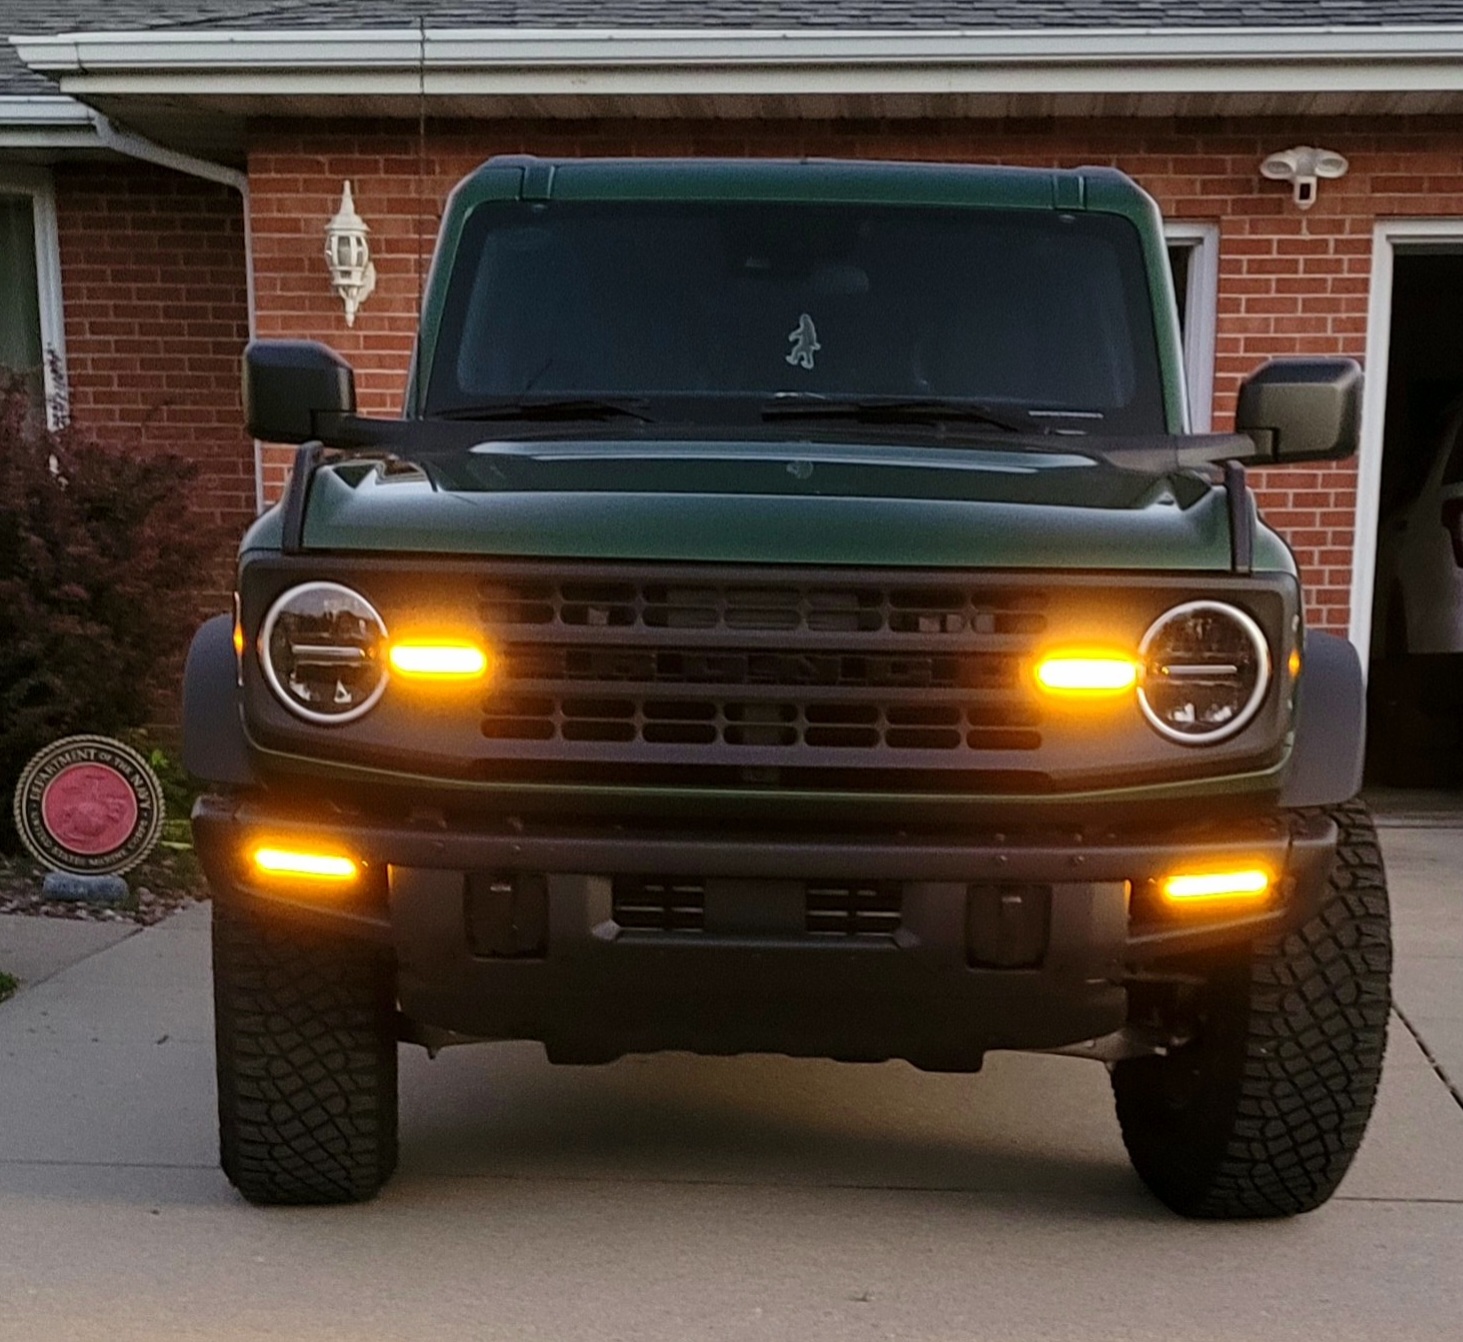 Ford Bronco Front End Friday! Show off your Bronco! Snapchat-1035343755